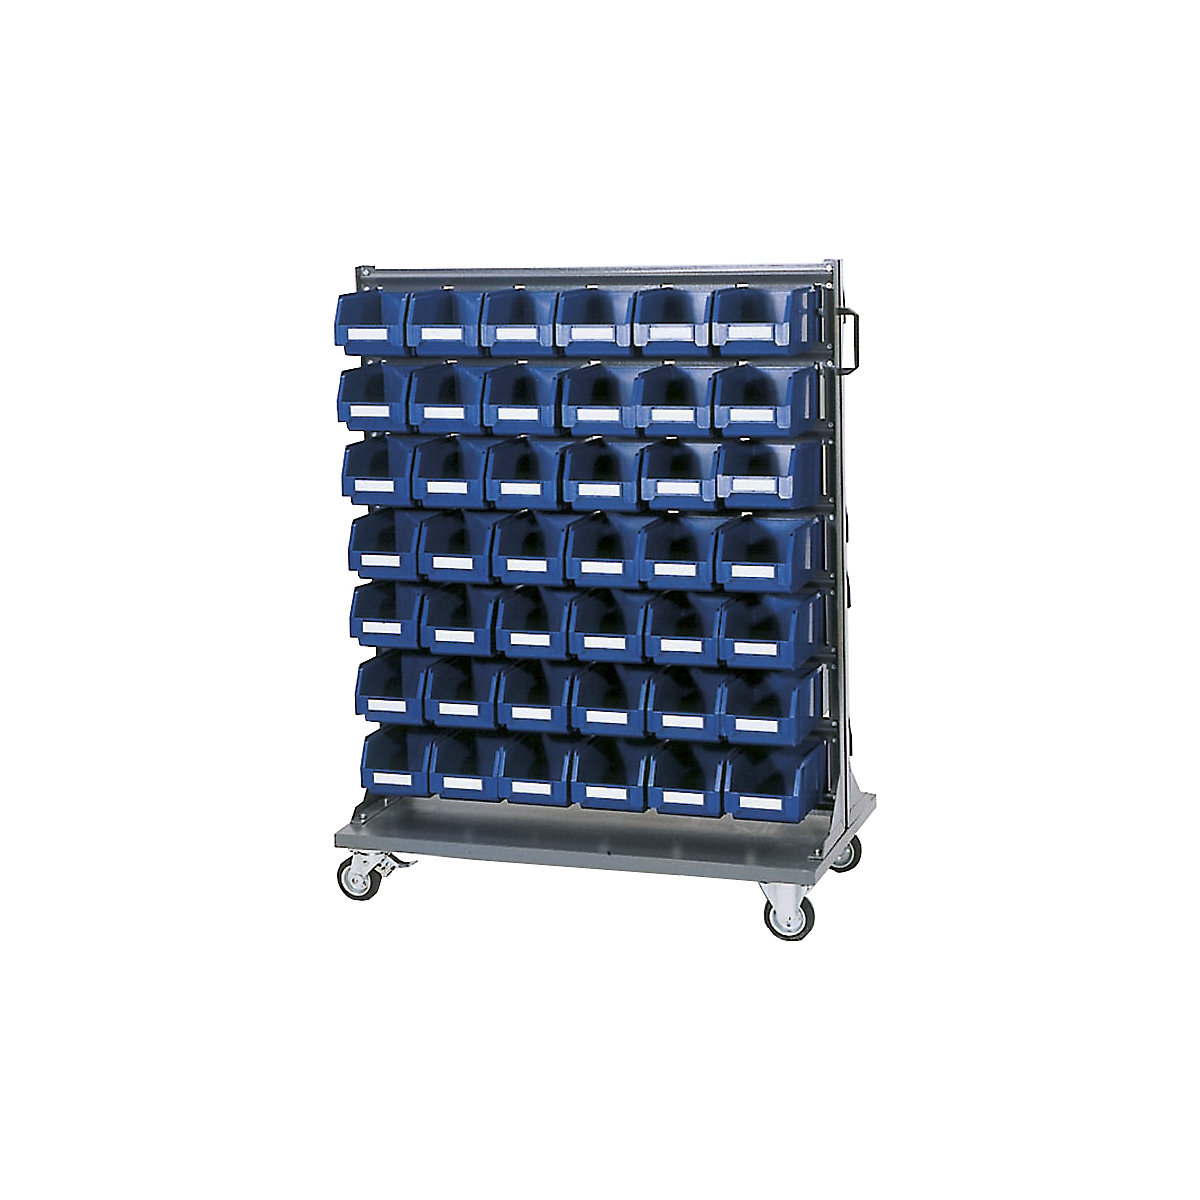 Storage shelf unit dolly, with open fronted storage bins, height 1335 mm-2